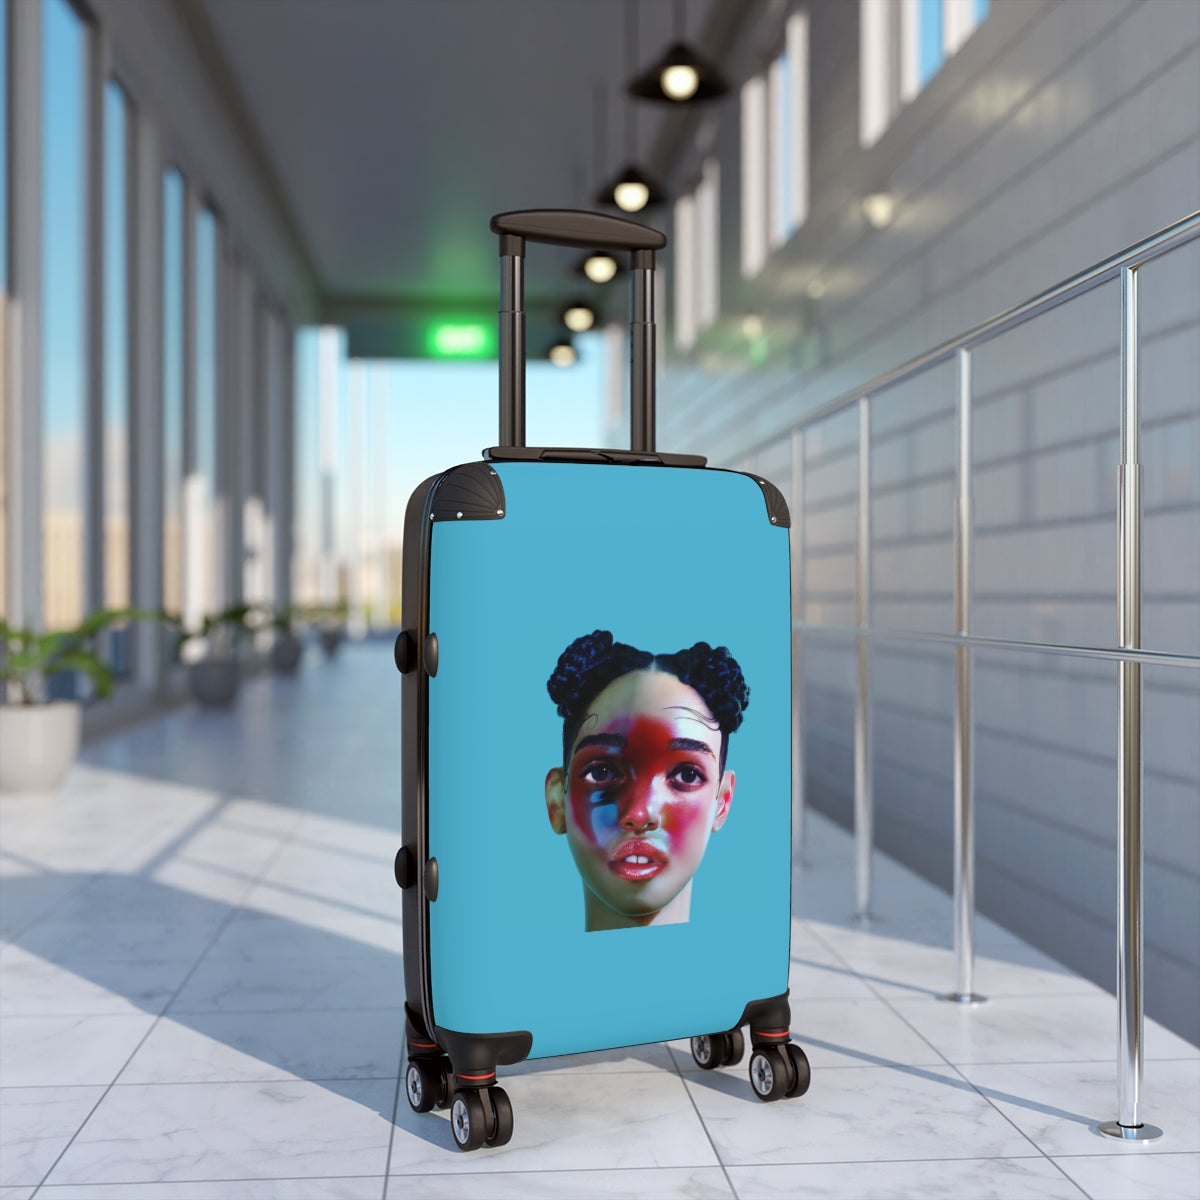 Getrott FKA Twigs LP1 2014 Blue Cabin Suitcase Extended Storage Adjustable Telescopic Handle Double wheeled Polycarbonate Hard-shell Built-in Lock-Bags-Geotrott